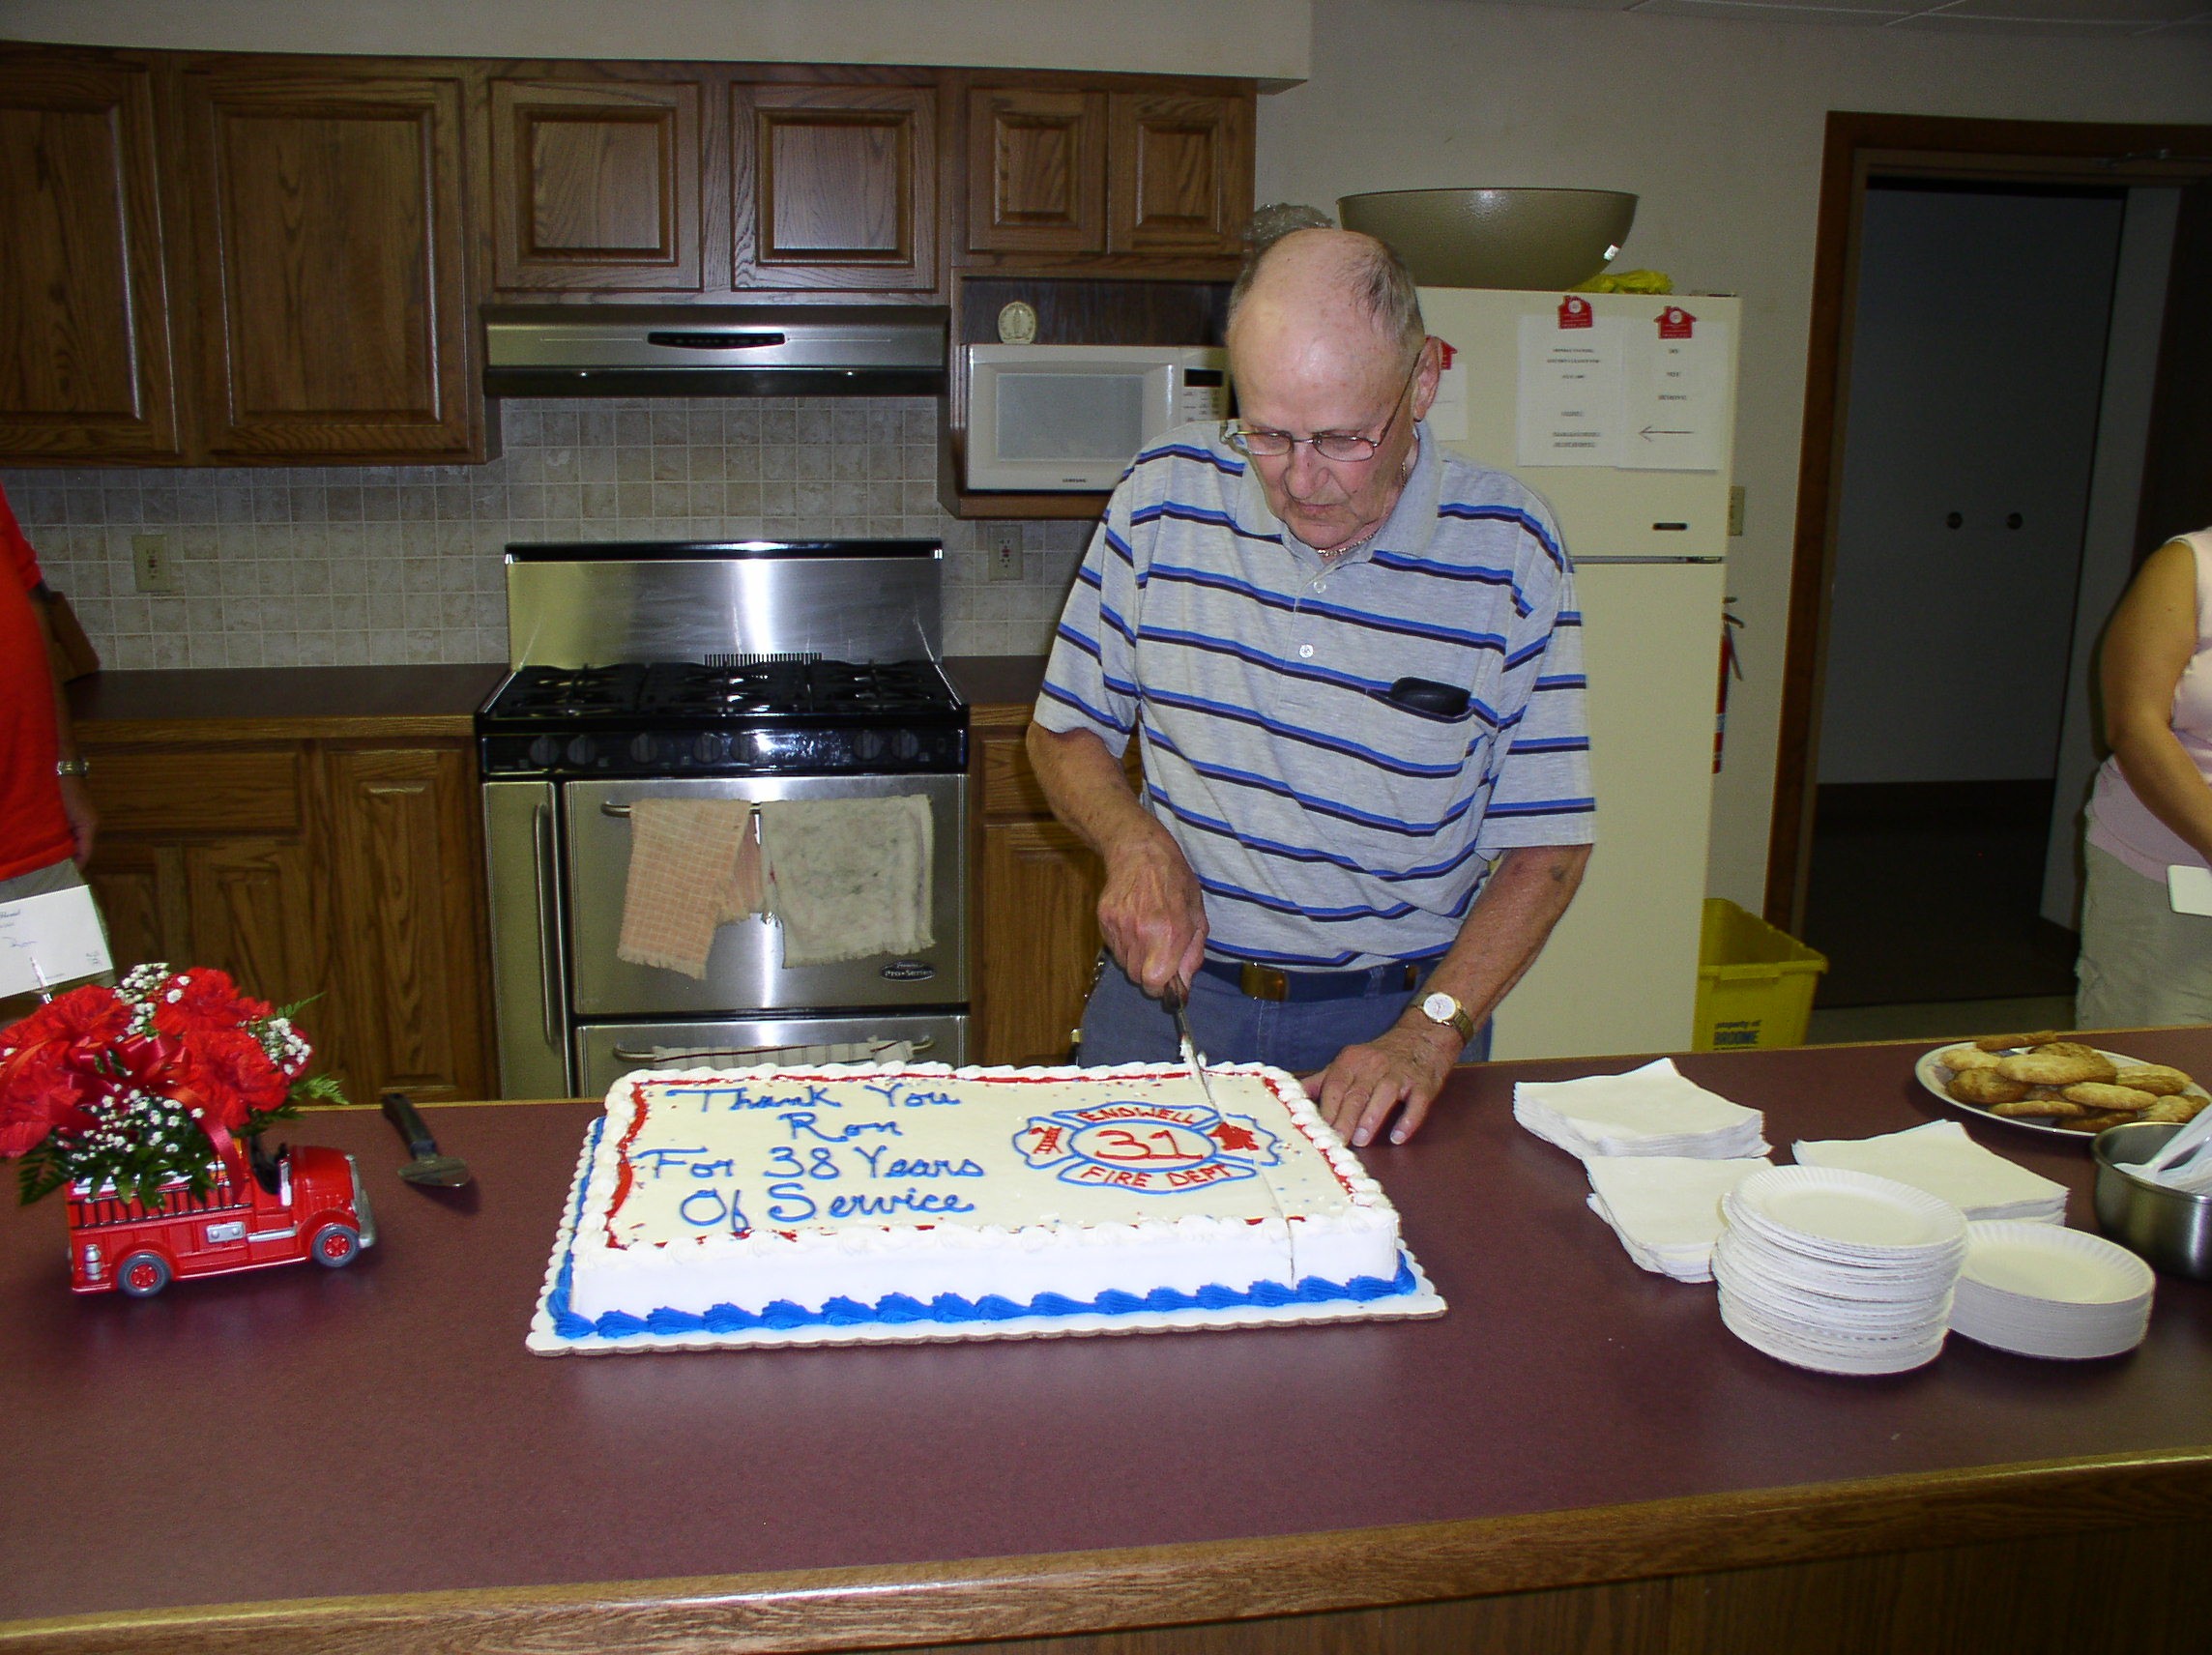 07-30-05  Other - Ron Retires